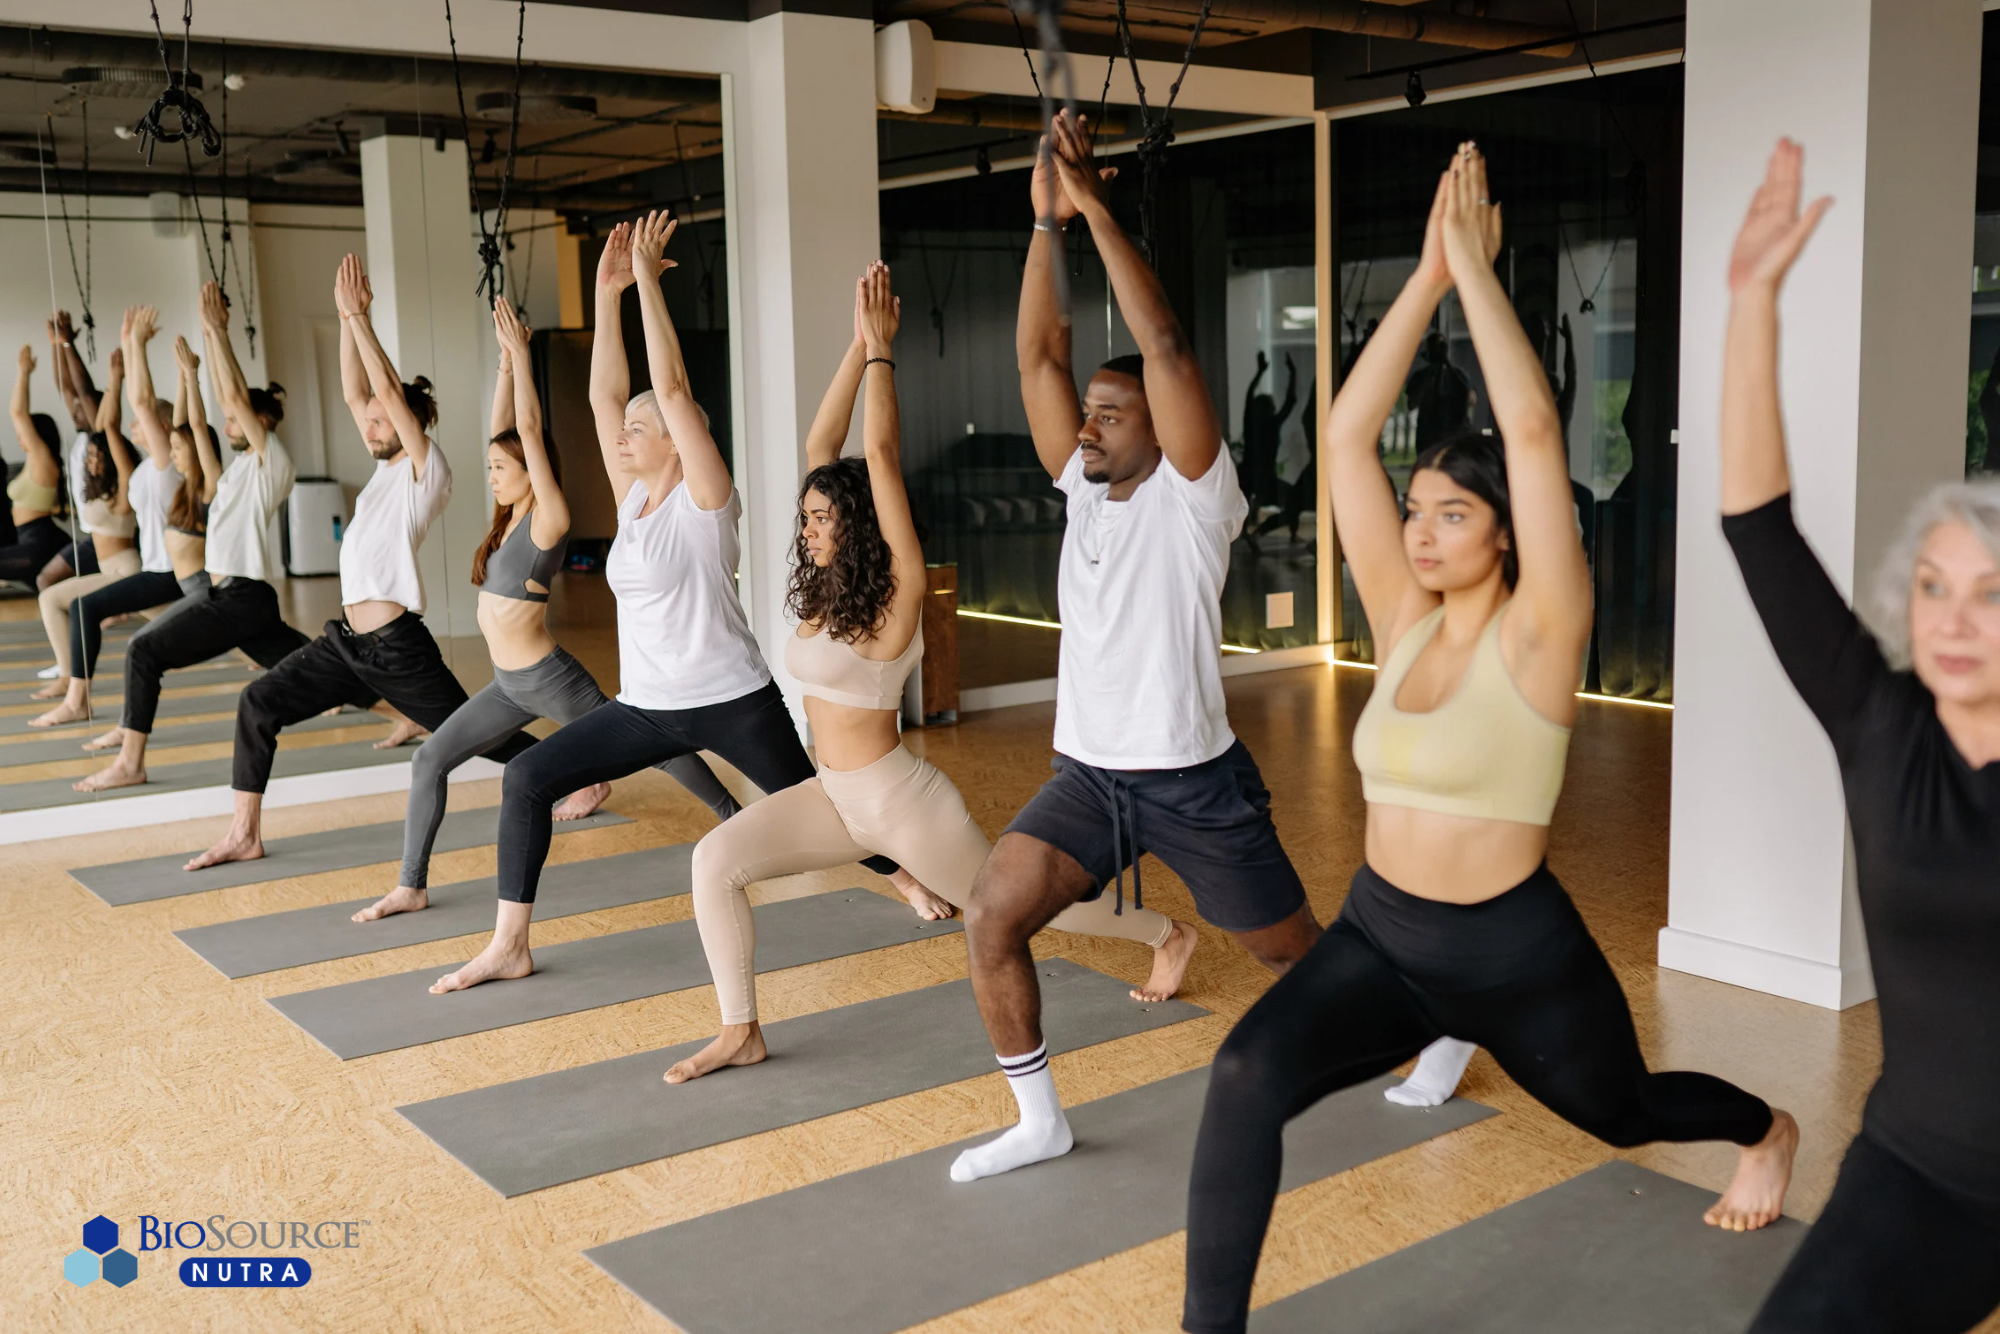 A group of people perform yoga exercises